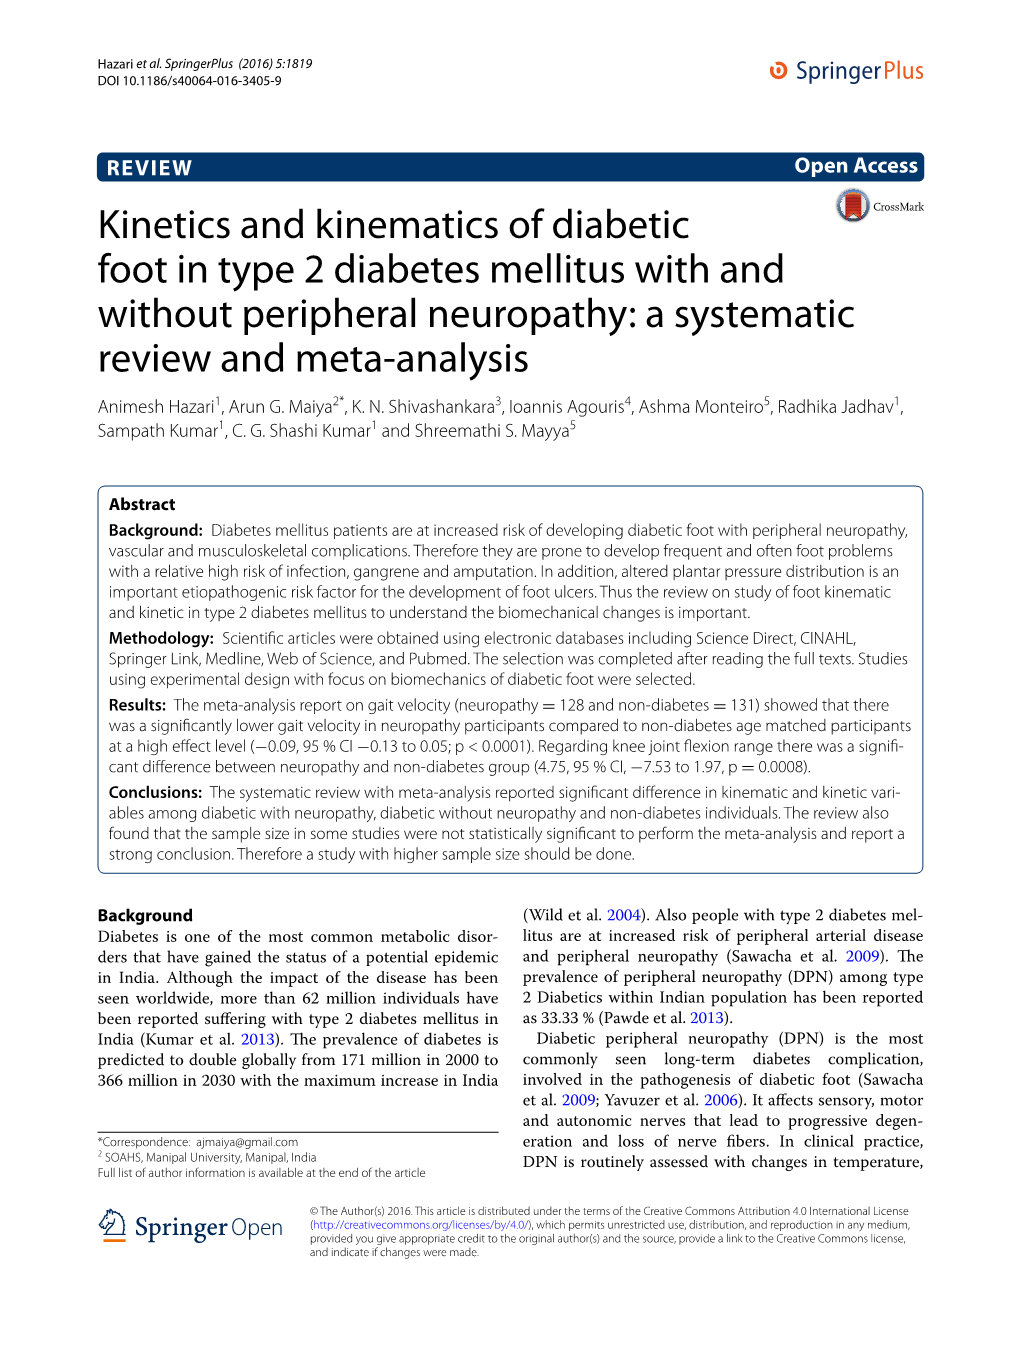 Kinetics and Kinematics of Diabetic Foot in Type 2 Diabetes Mellitus With